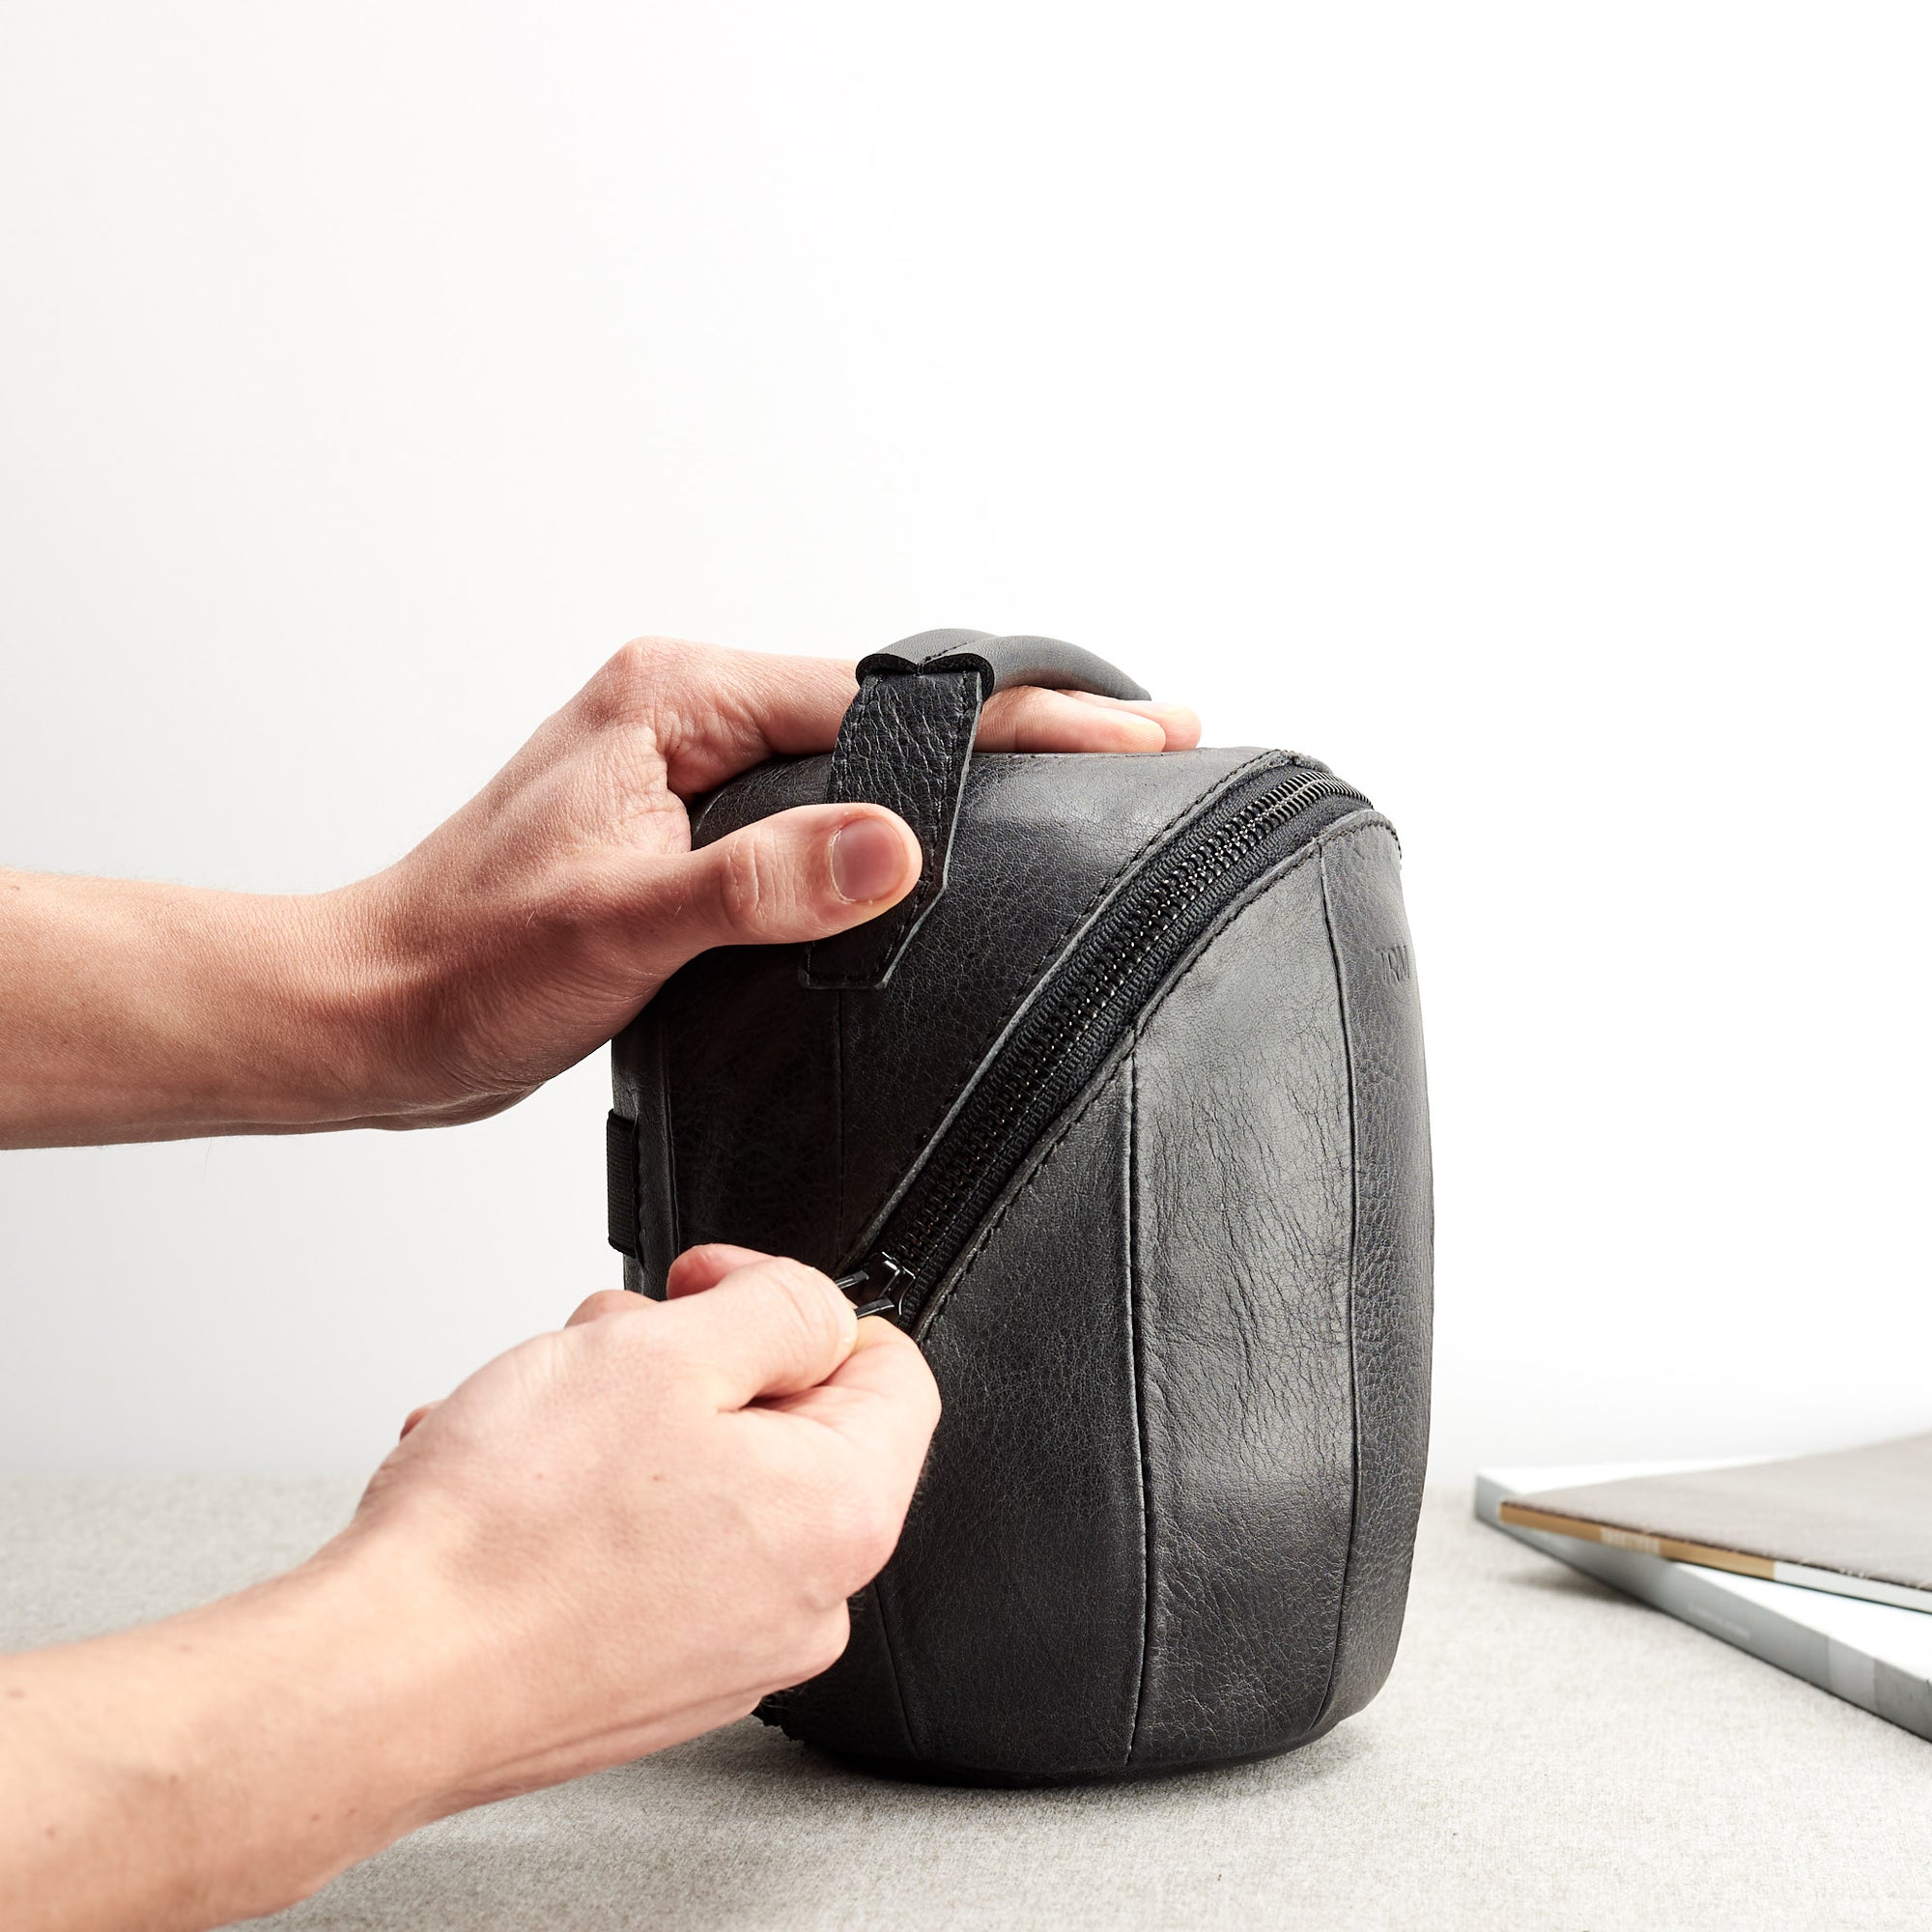 Portable Apple's cover. HomePod black leather travel carrying case.